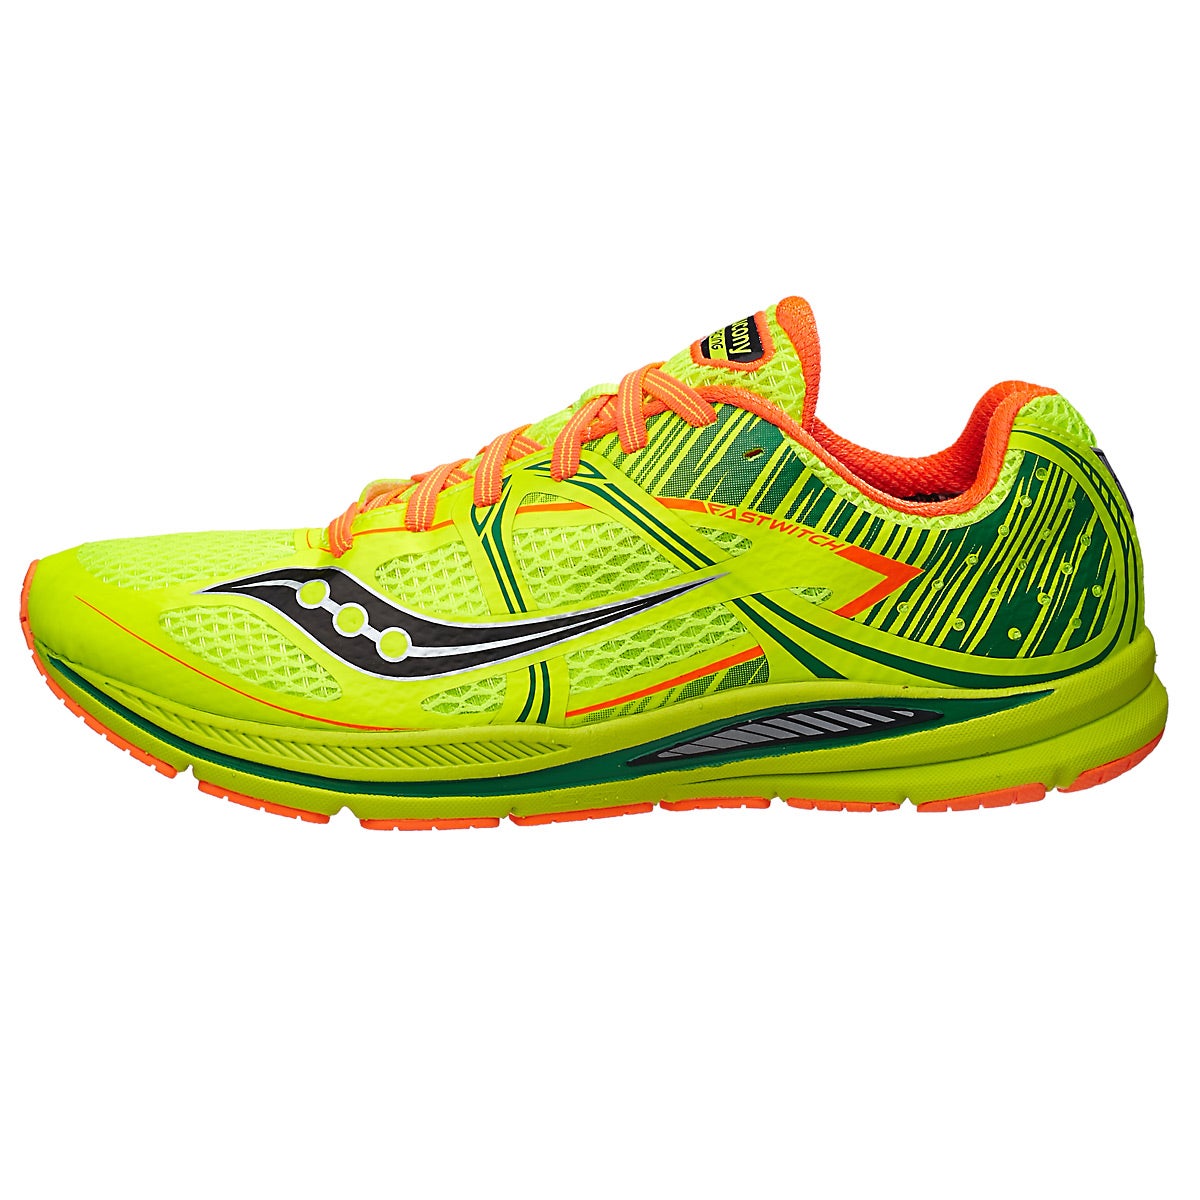 saucony fastwitch 7 running warehouse